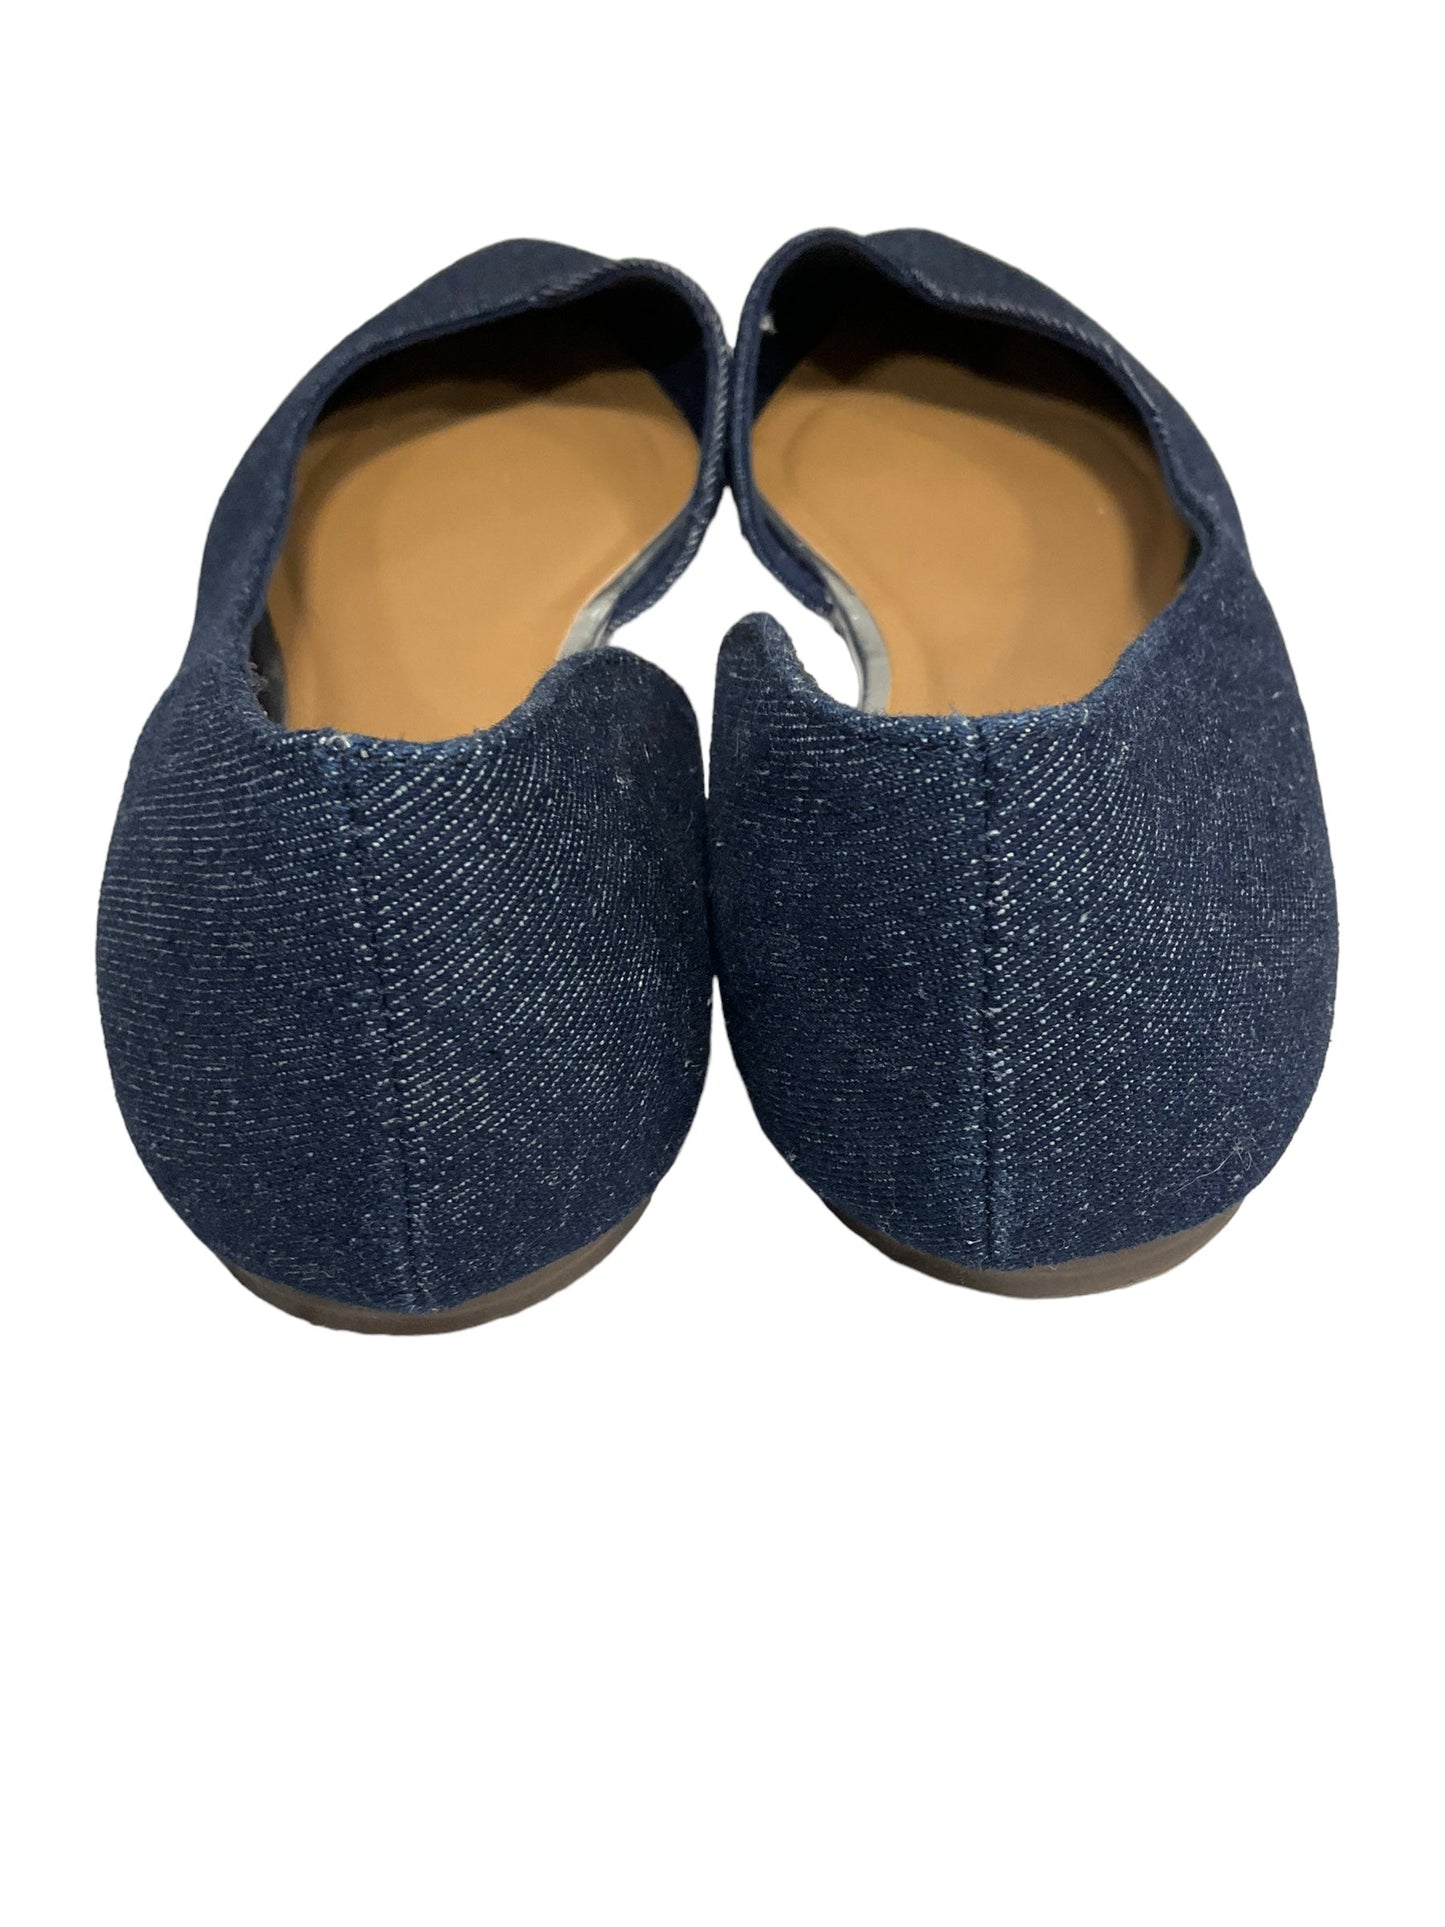 Shoes Flats Other By Gap O  Size: 9